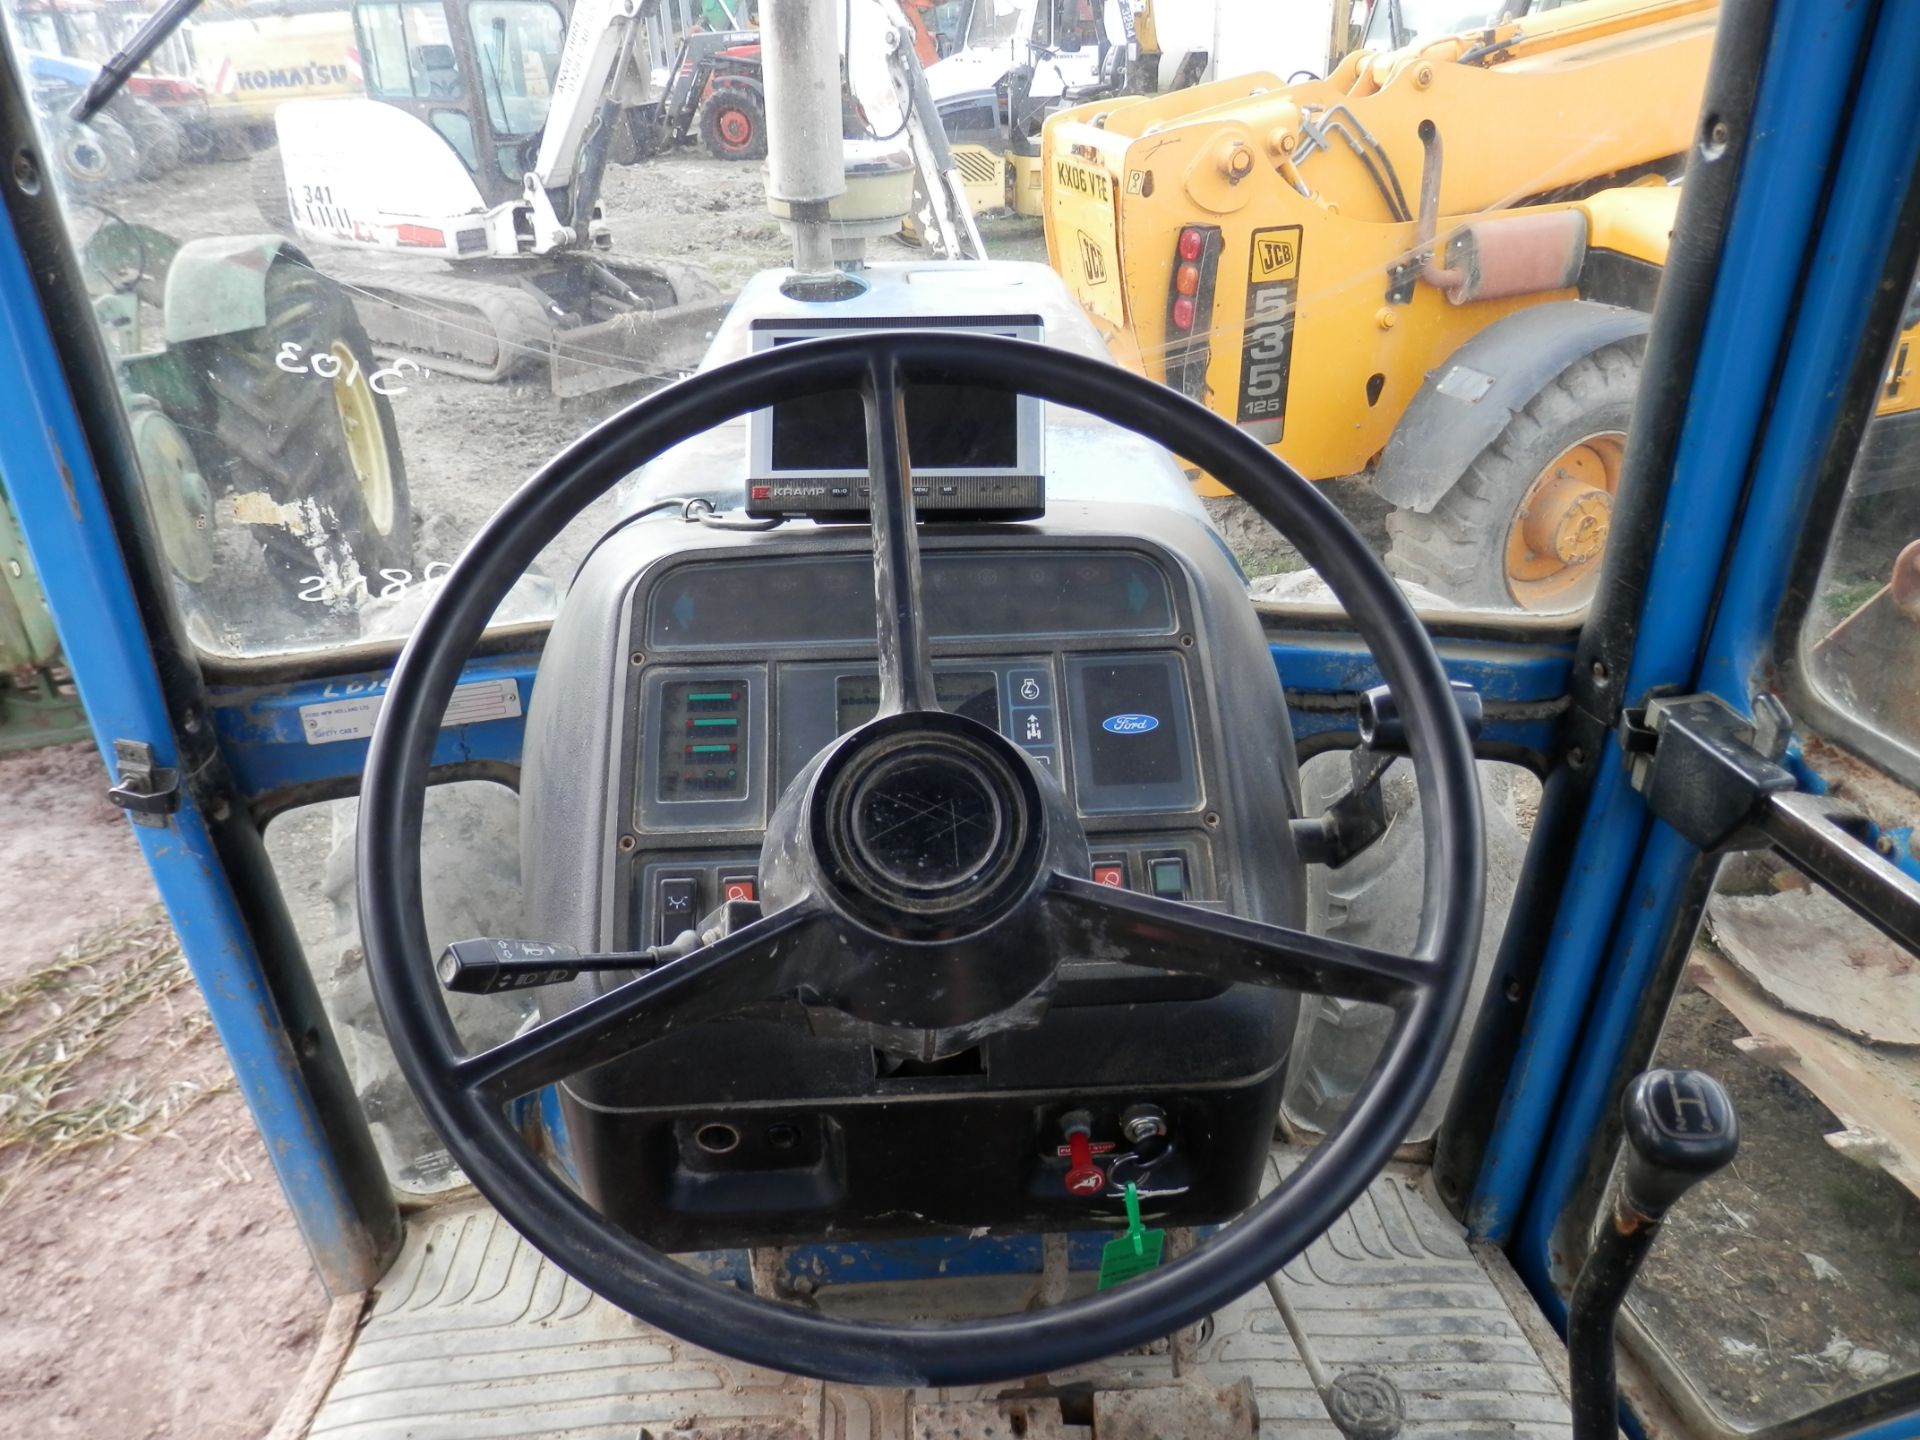 1990/H REG FORD 8210 DIESEL TRACTOR, RUNNING & WORKING. 9409 WORKING HOURS. - Image 10 of 12